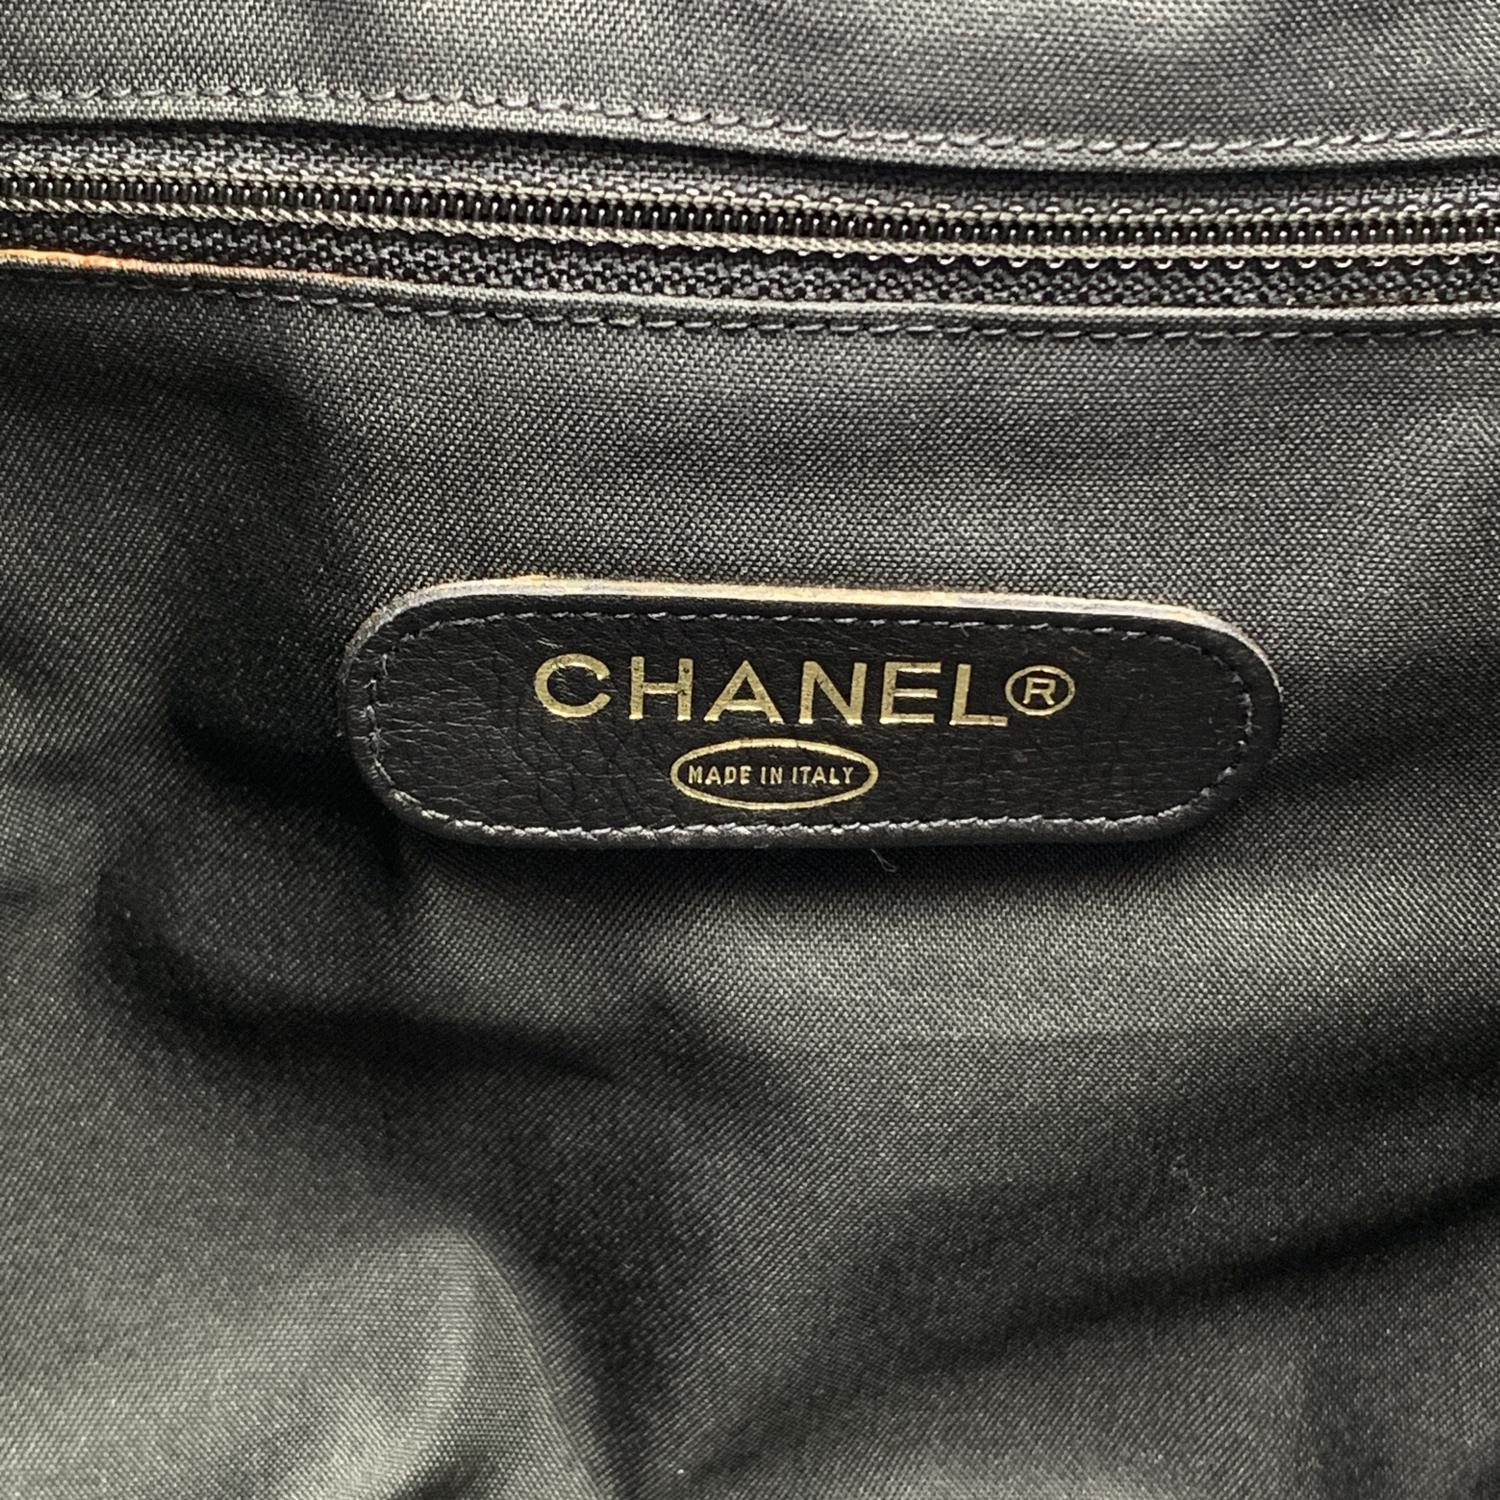 Chanel travel duffle bag in black leather with quilted stitching. It features upper zipper closure, double handle, adjustable shoulder strap and name tag with CC logos. Black canvas lining and 2 side zip pockets inside. 'CHANEL - Made in Italy' tag